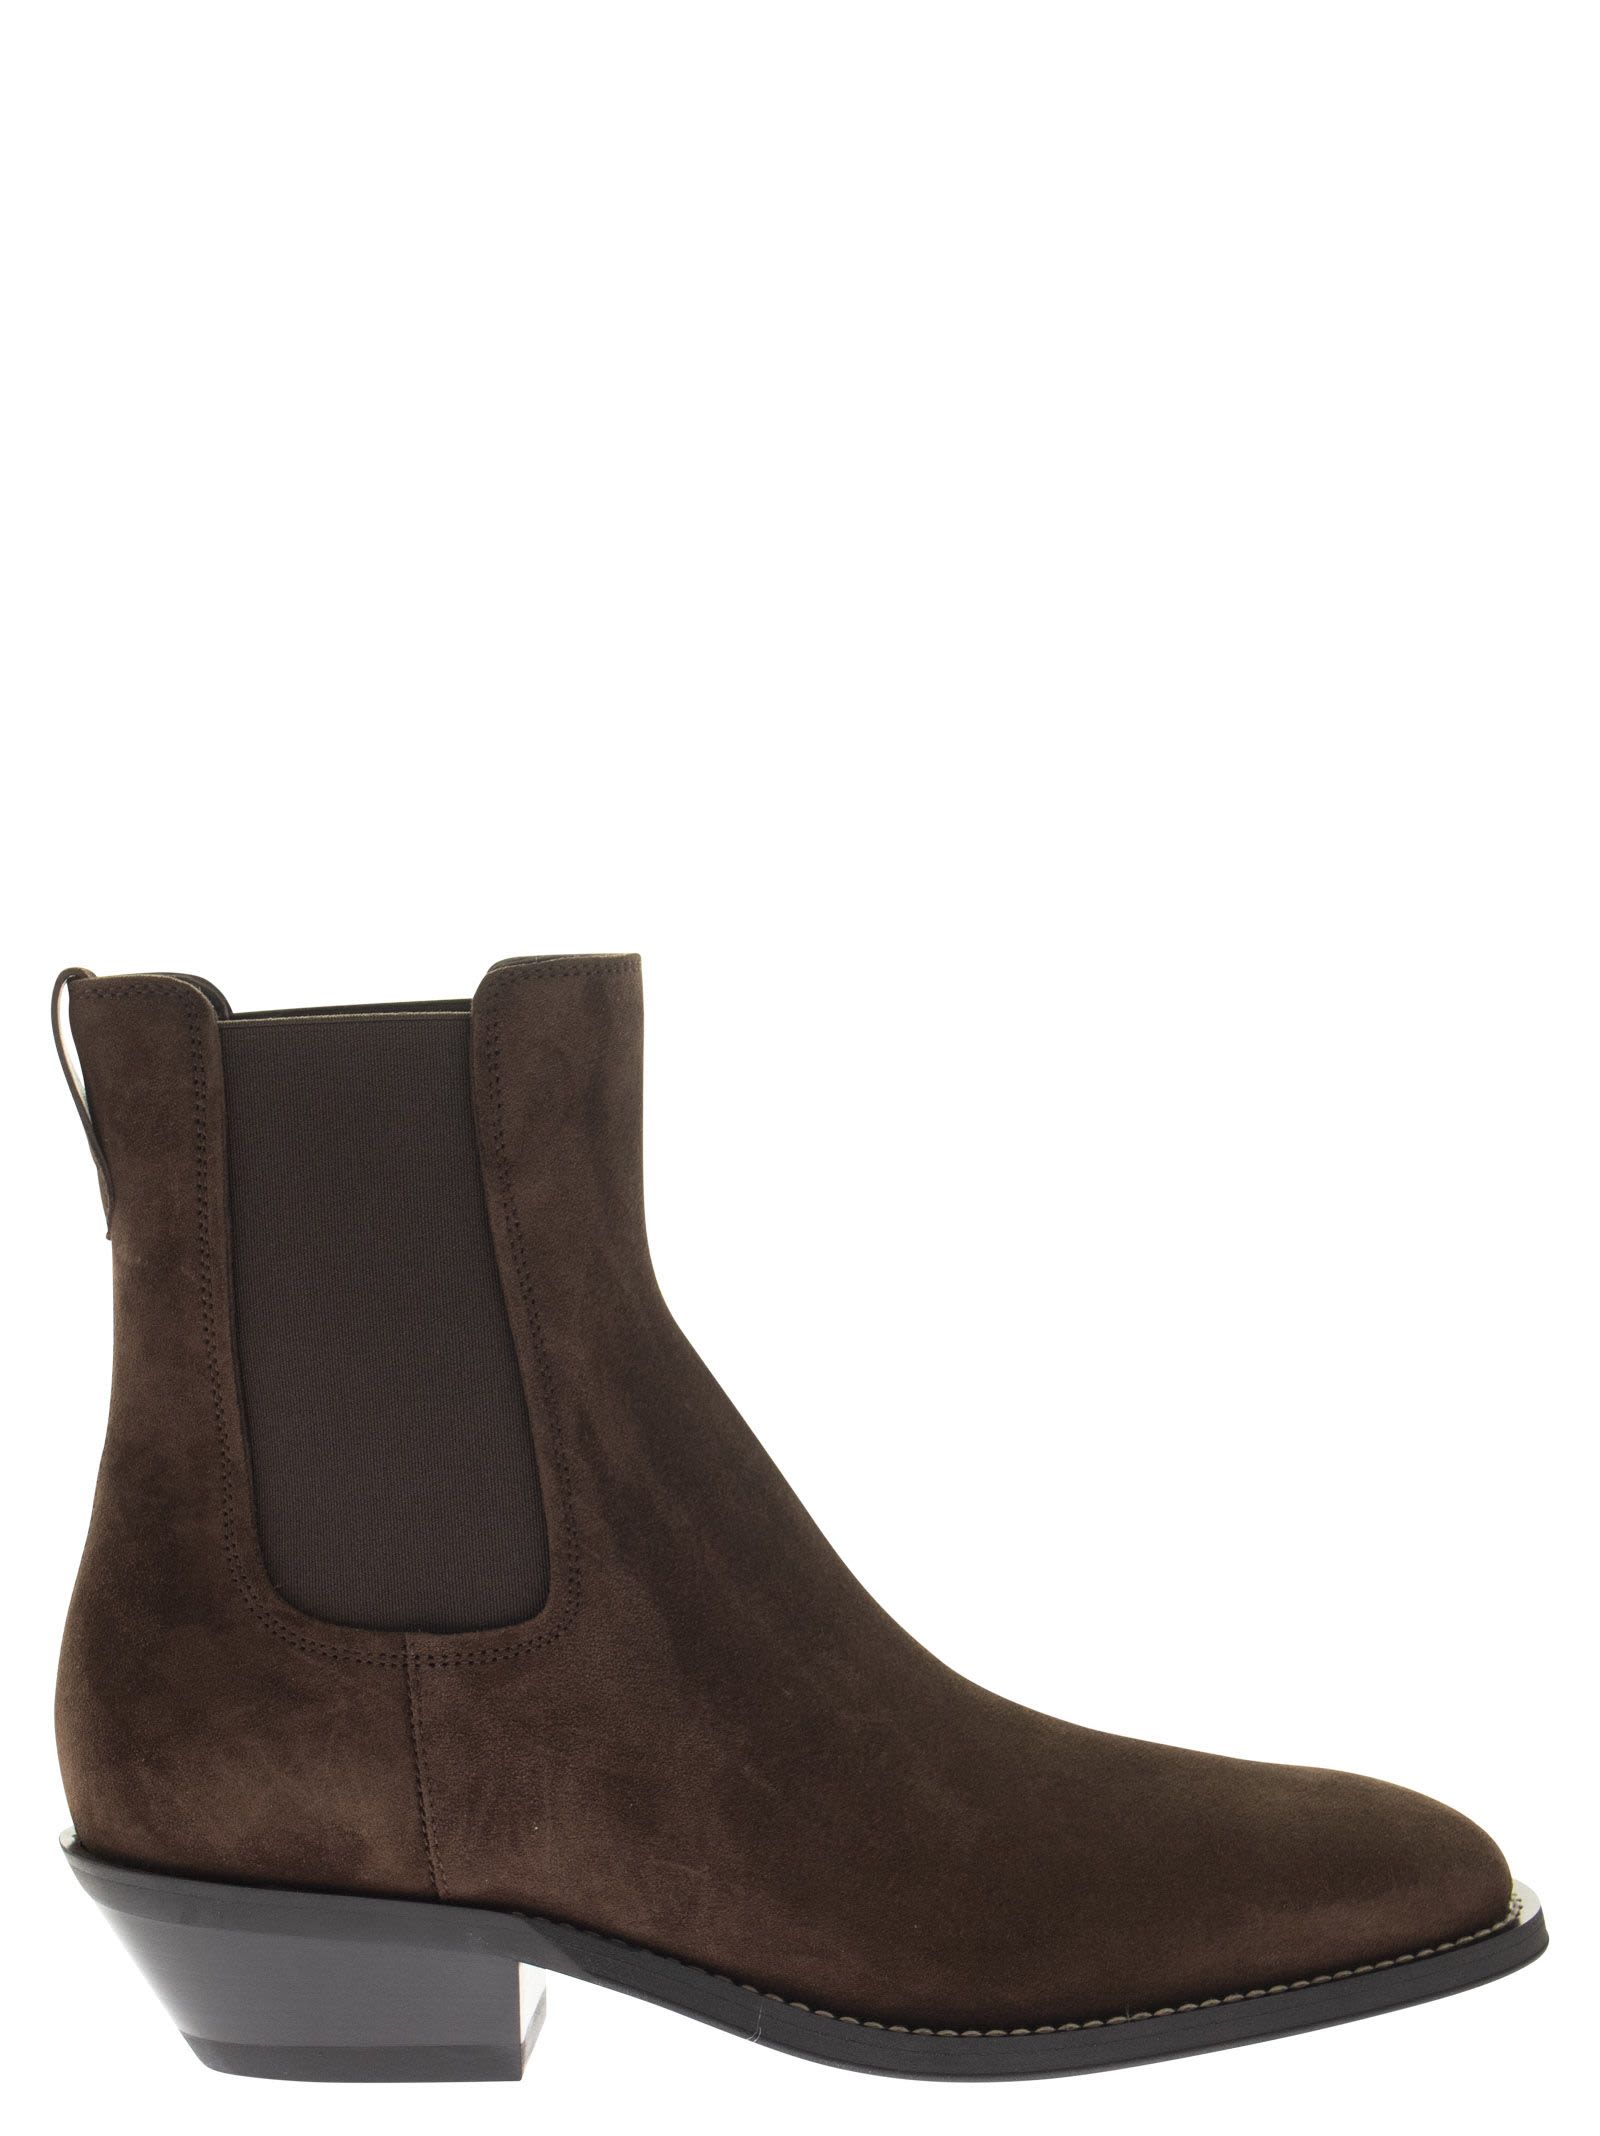 Tods Texan Suede Ankle Boot